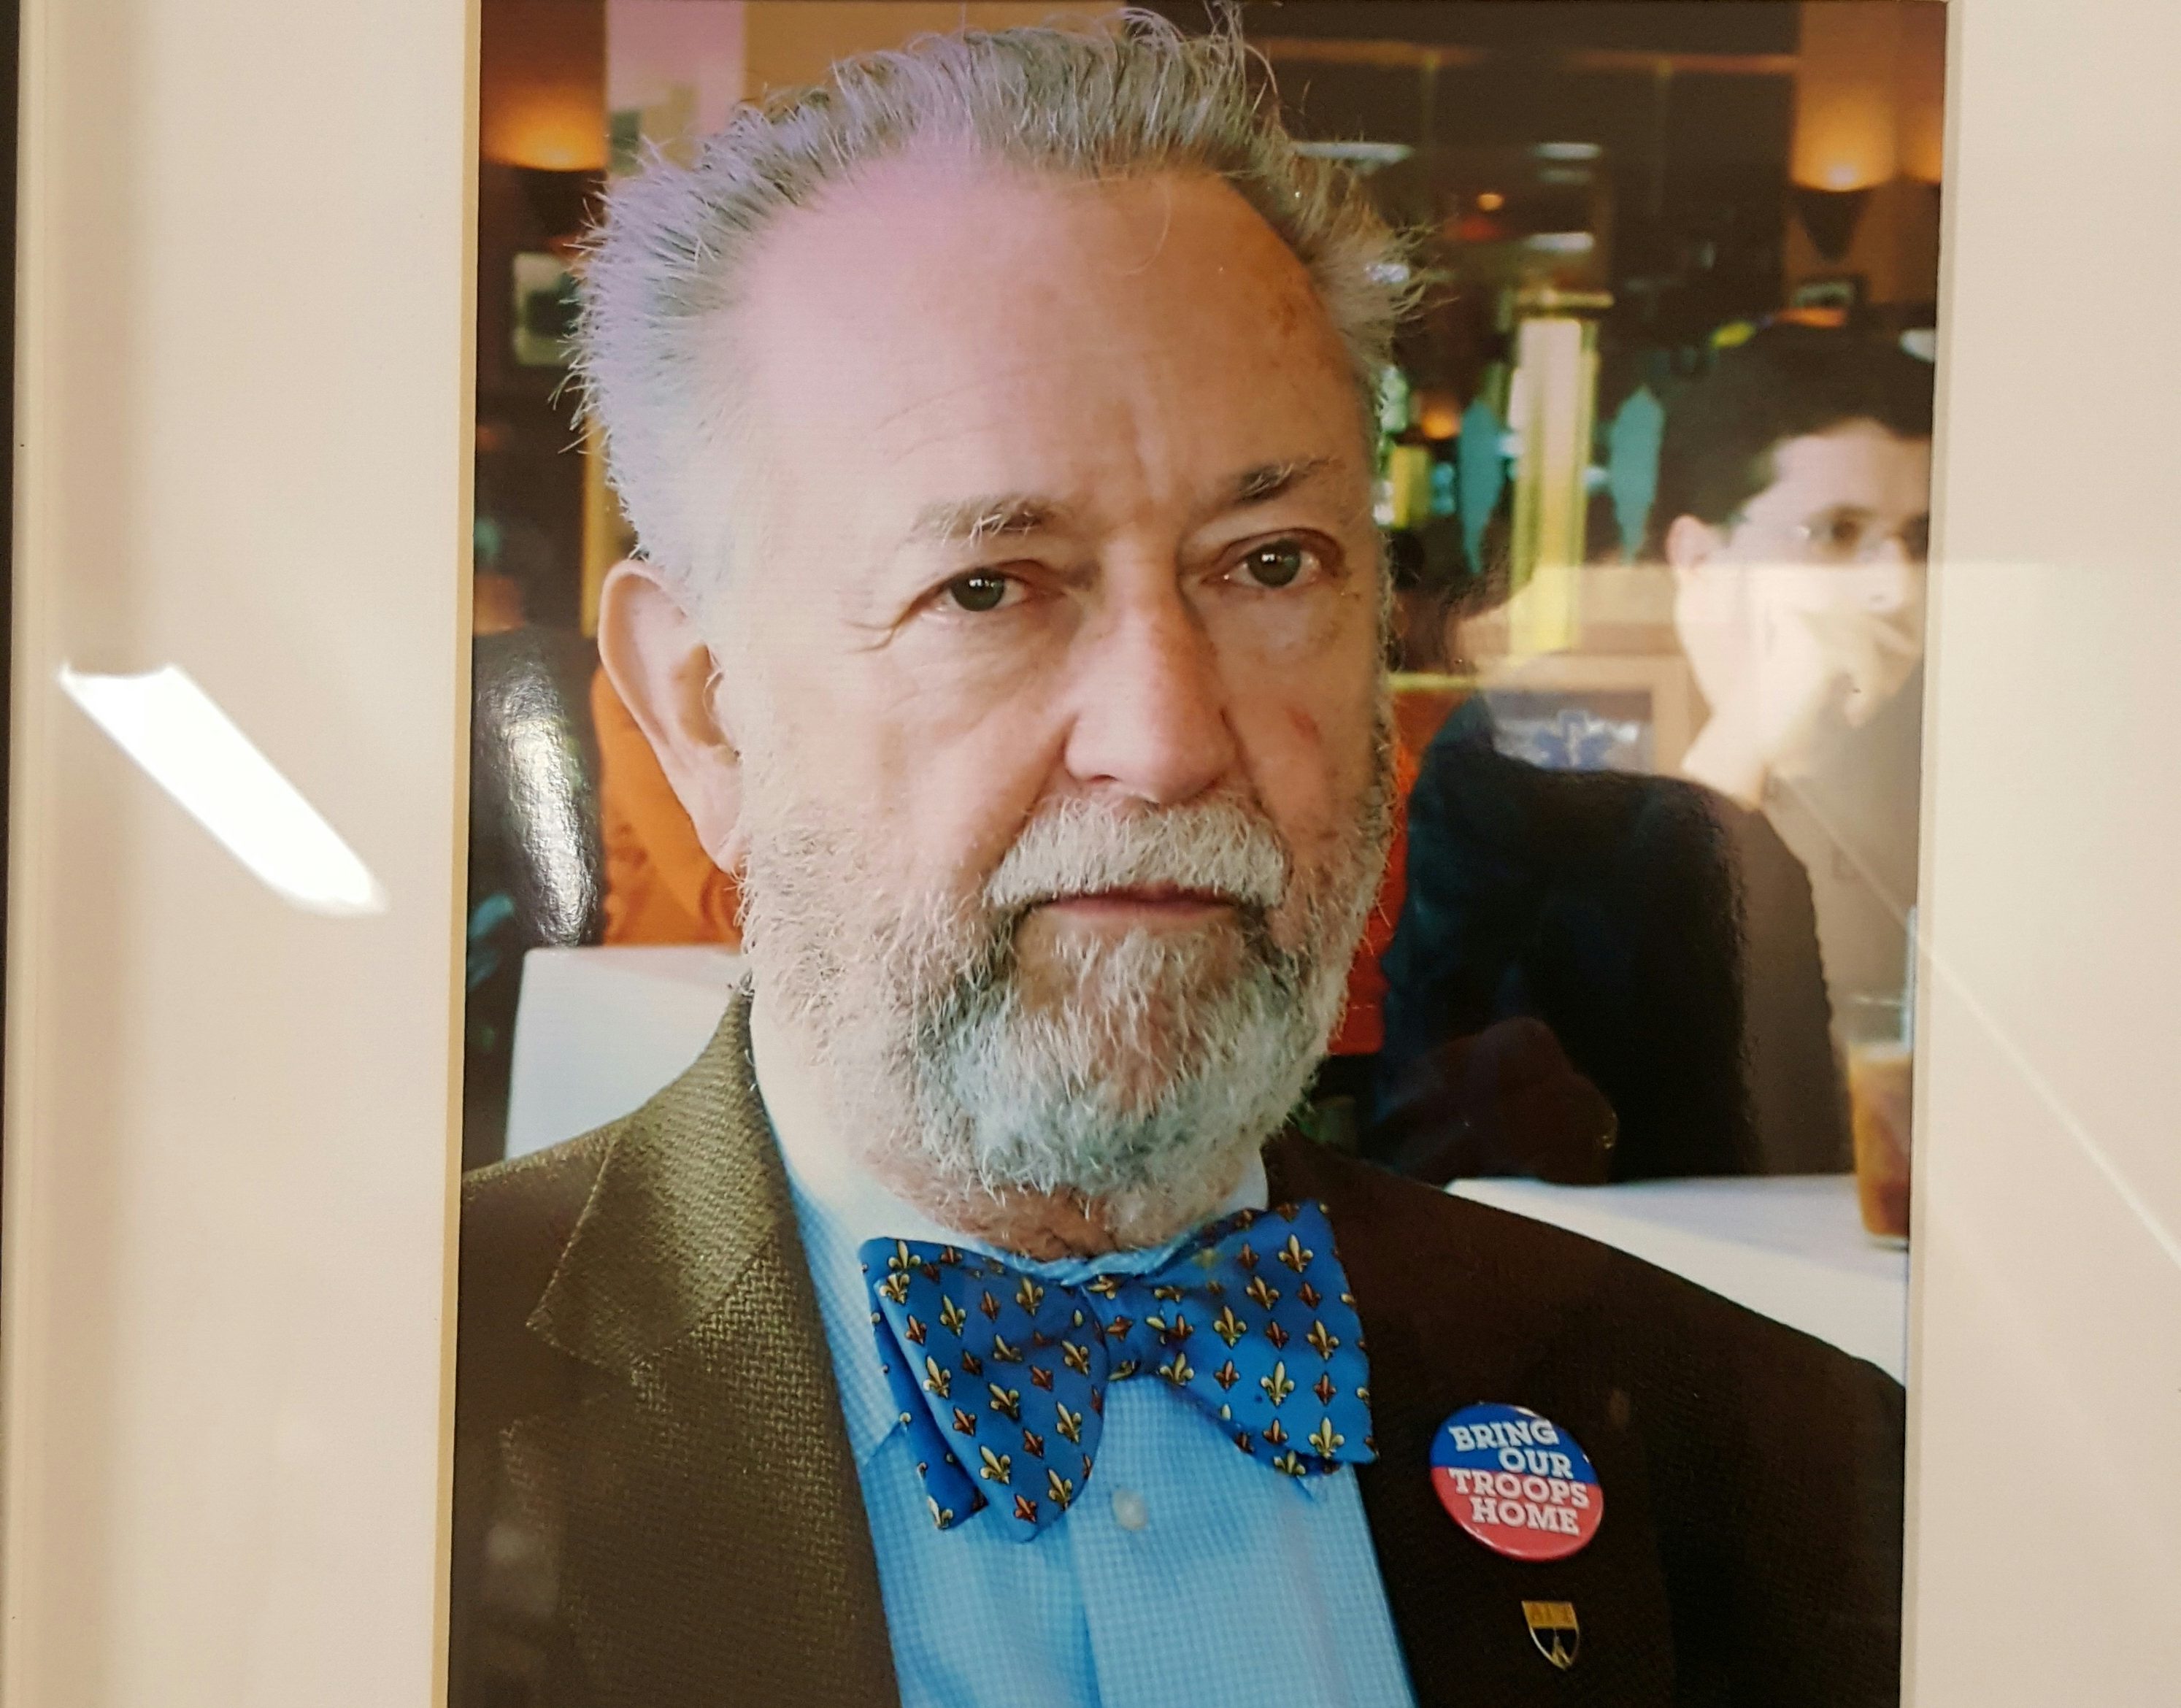 A photo of Ray Berard was featured at the John Adams Auditorium in a frame while they had his eulogy on Sept. 15, 2017. Photo by Barbara Muniz.